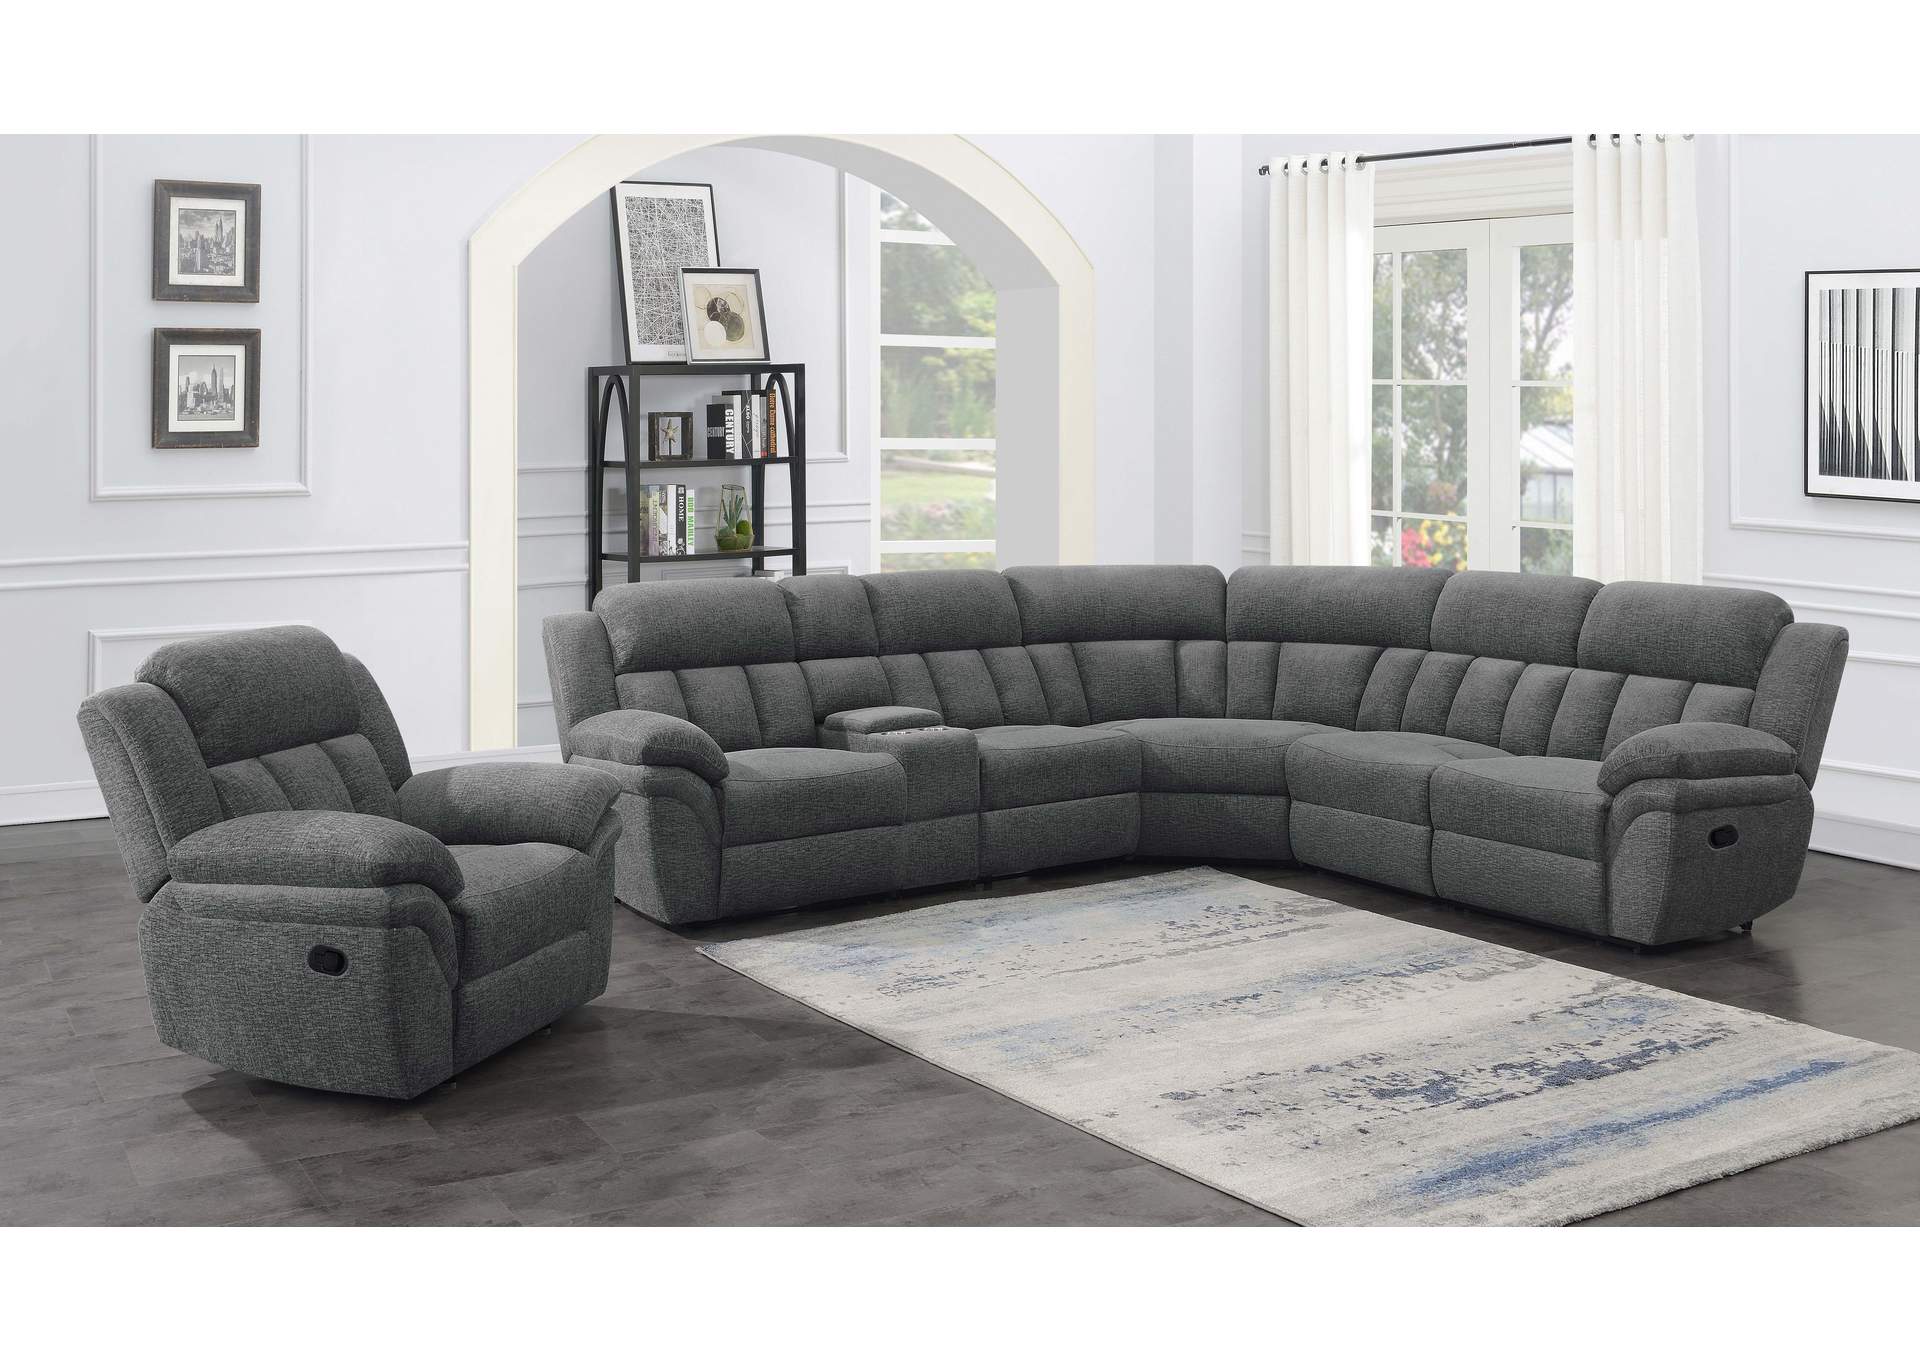 Bahrain 6-piece Upholstered Motion Sectional Charcoal,Coaster Furniture